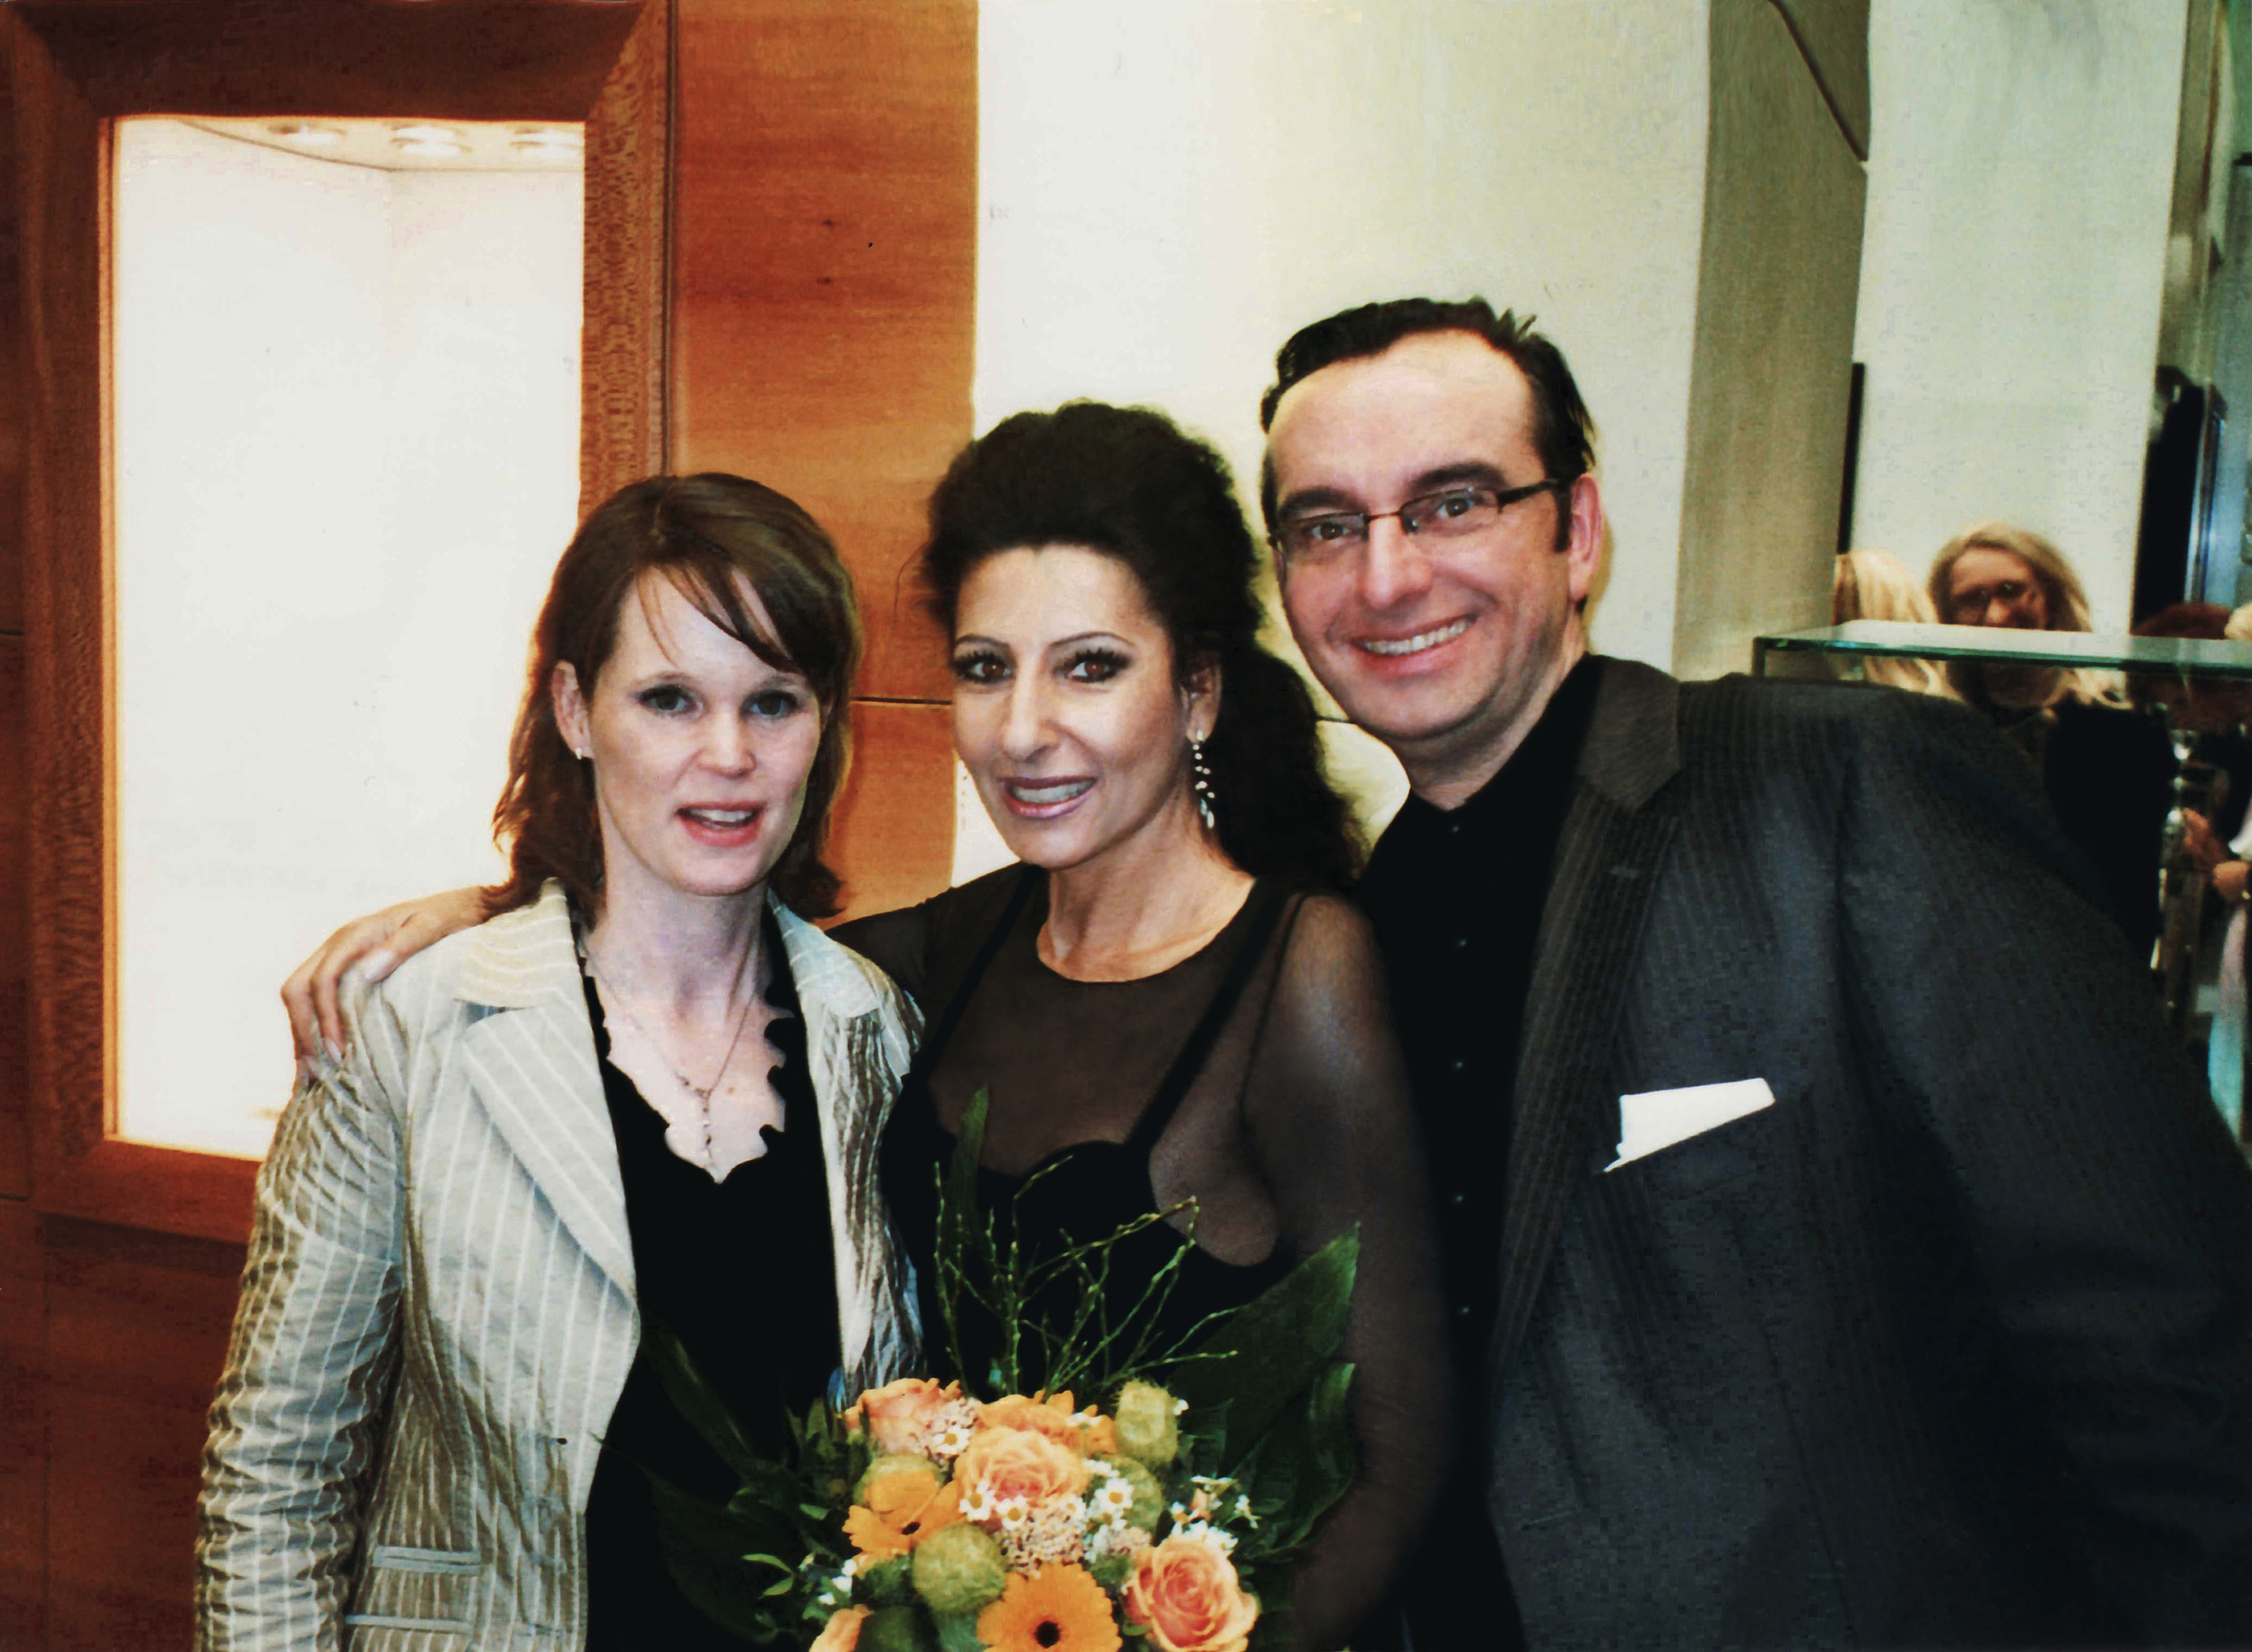 Lucia Aliberti with the Chairman of Telio Group Oliver Drews and his wife⚘Belcanto Gala Concert⚘Laeiszhalle⚘Hamburg⚘Autograph Session⚘La Perla Fashion⚘Photo taken from the Newspaper⚘:http://www.luciaaliberti.it #luciaaliberti #oliverdrews #laeiszalle #hamburg #concert #party #laperlafashion